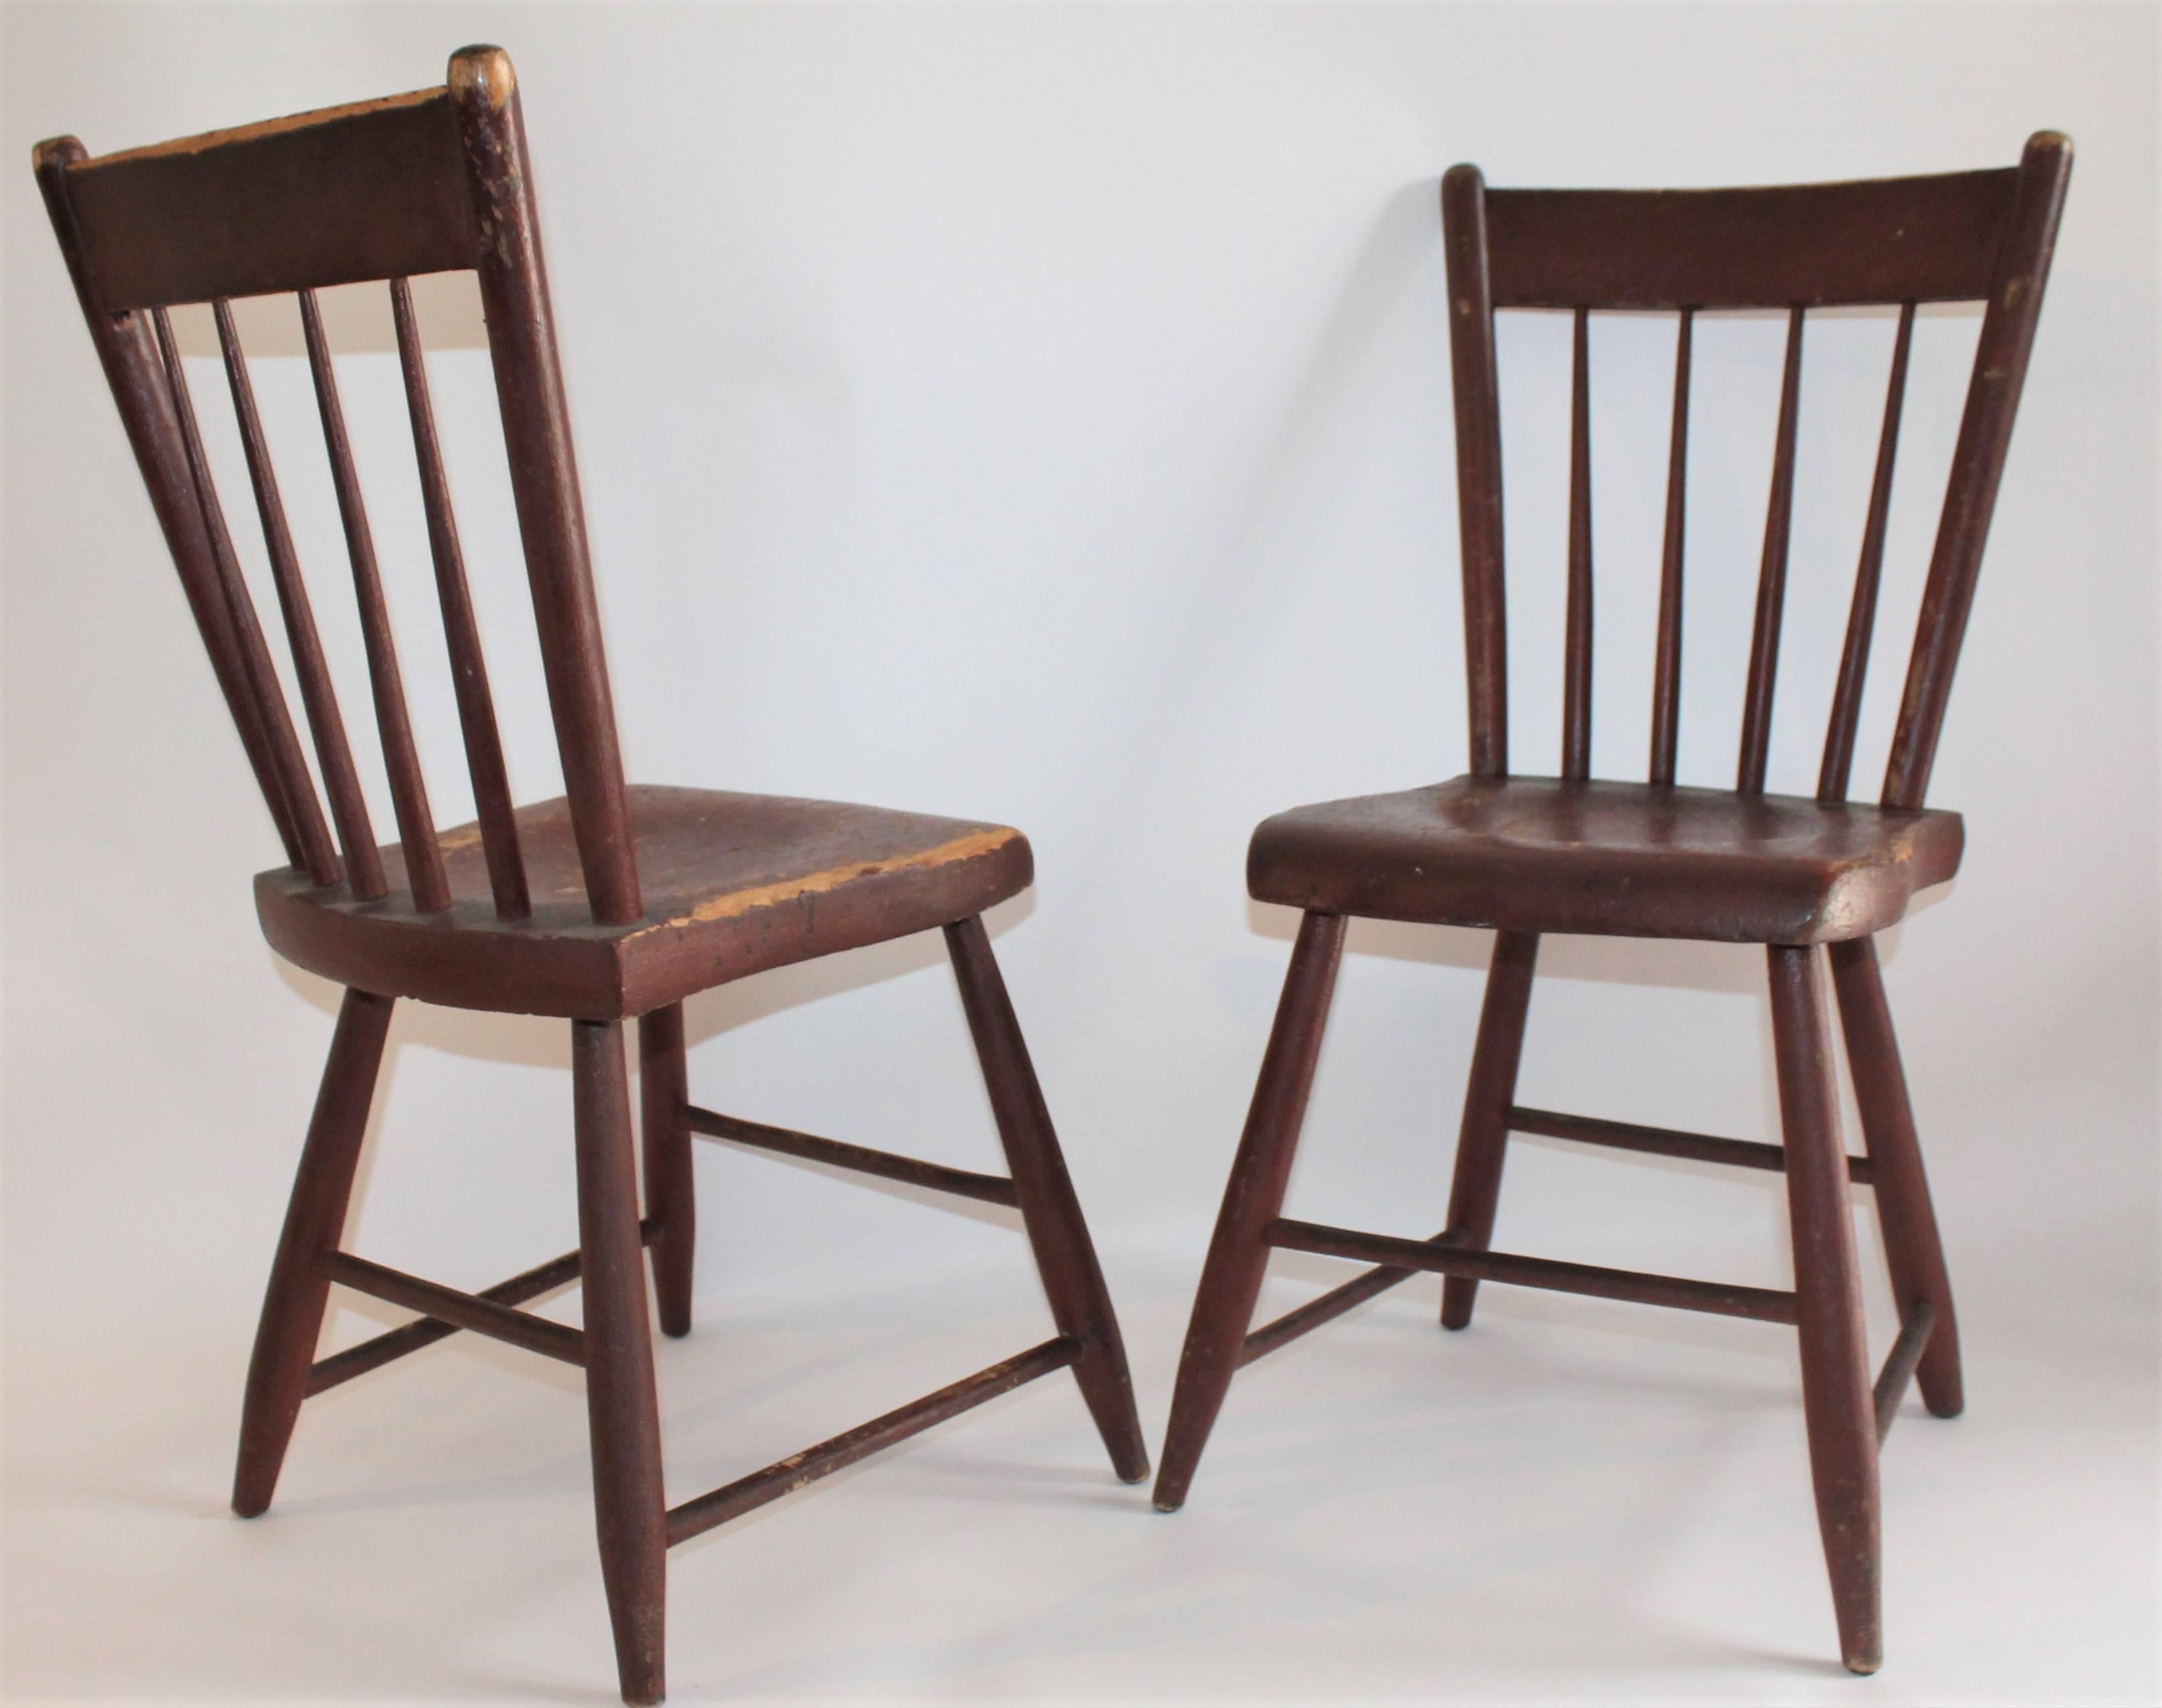 American 19th Century Original Red Painted Chairs from Pennsylvania, Pair